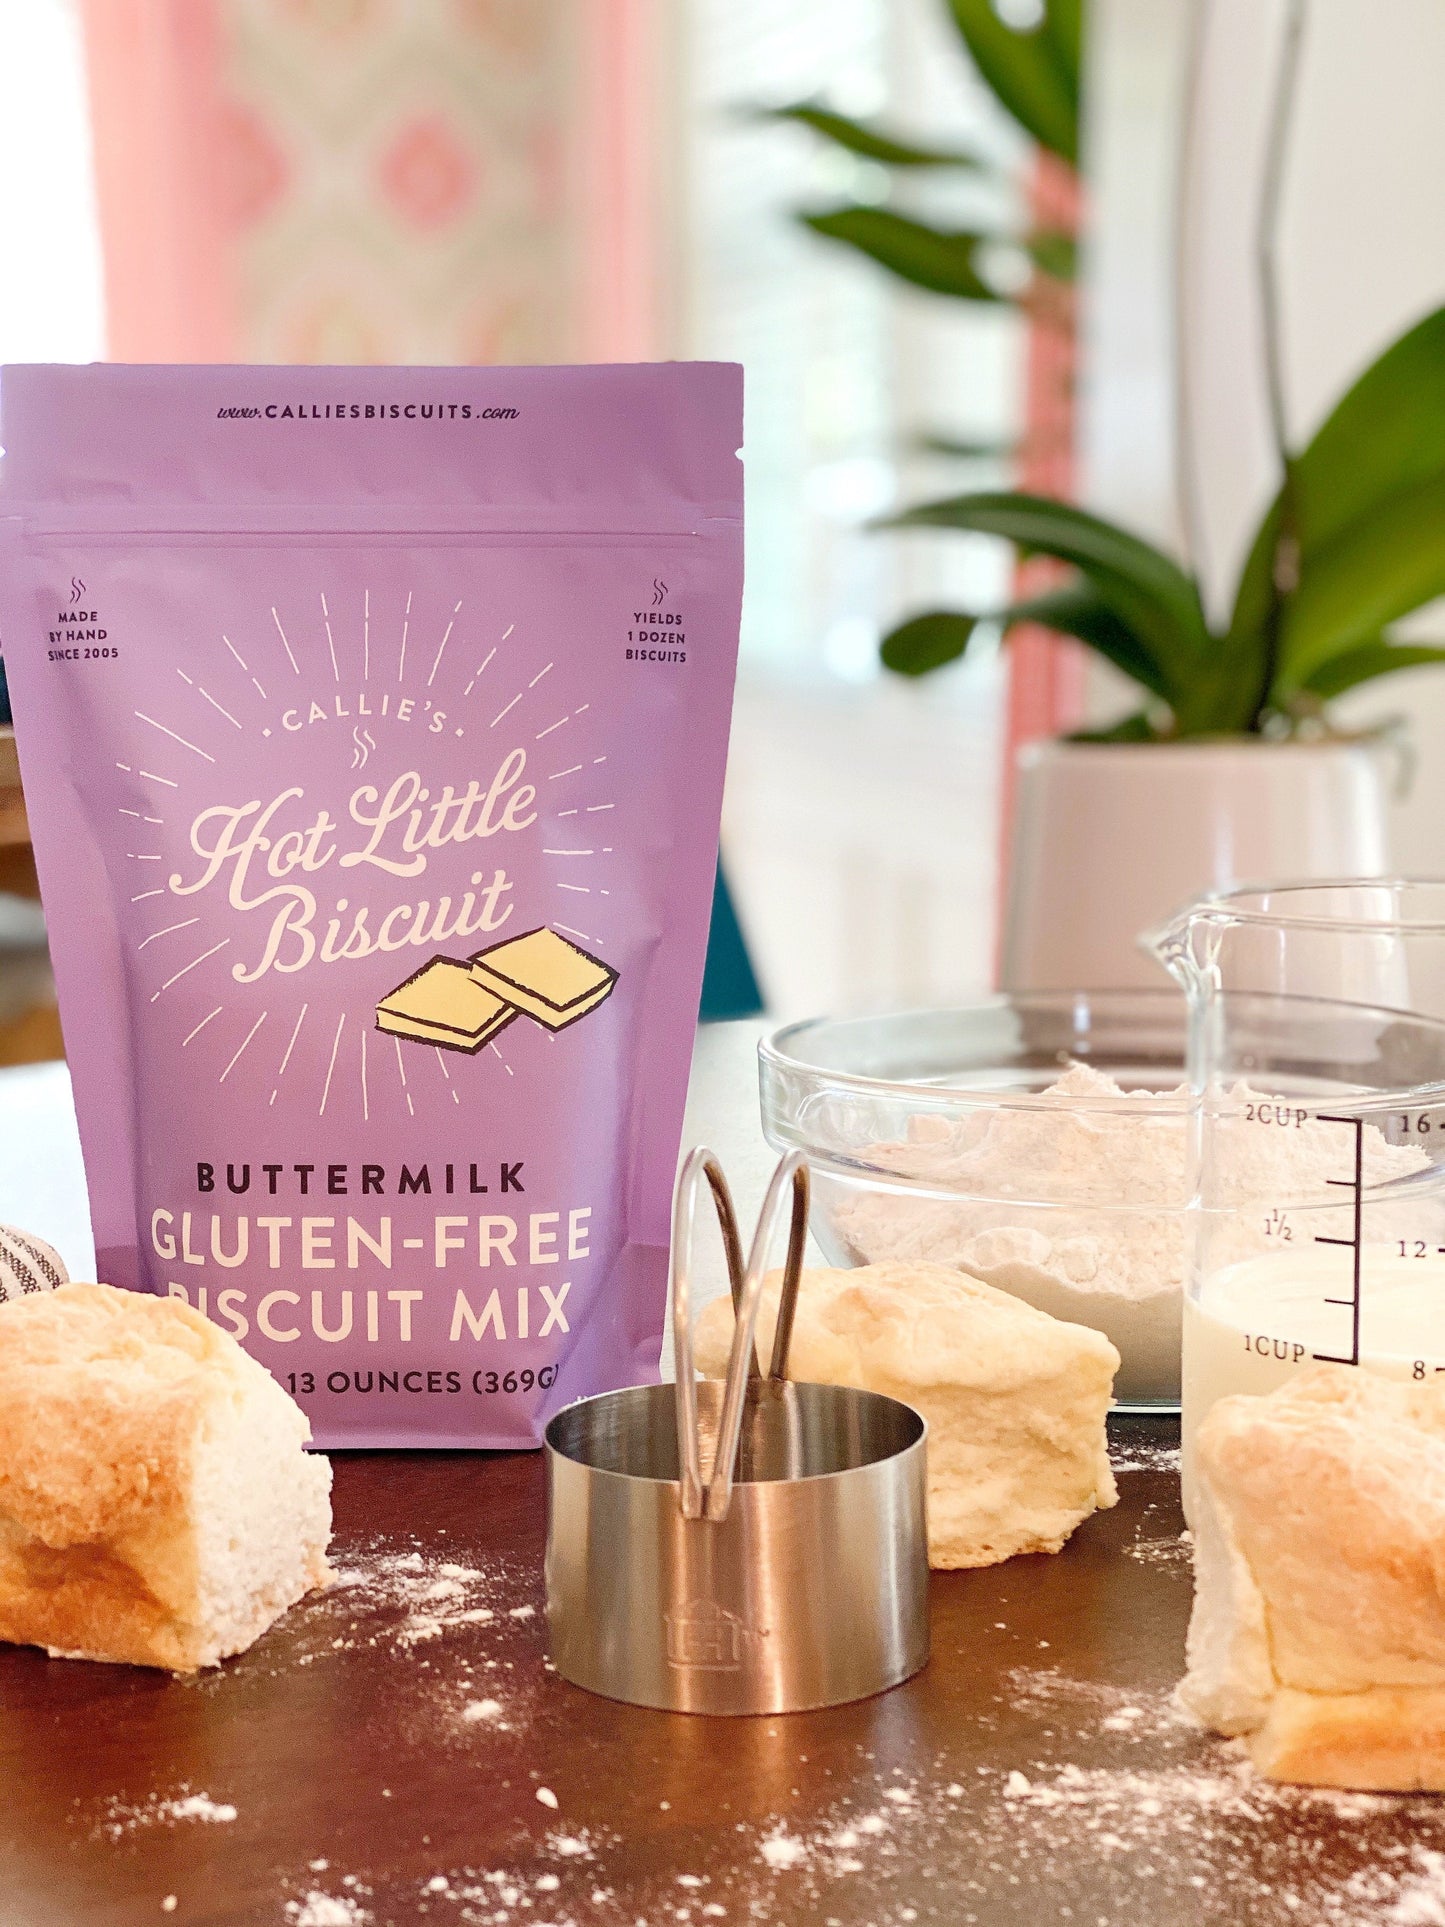 Biscuits & Jelly Gift Box - Gluten Free - Pluff Mud Mercantile